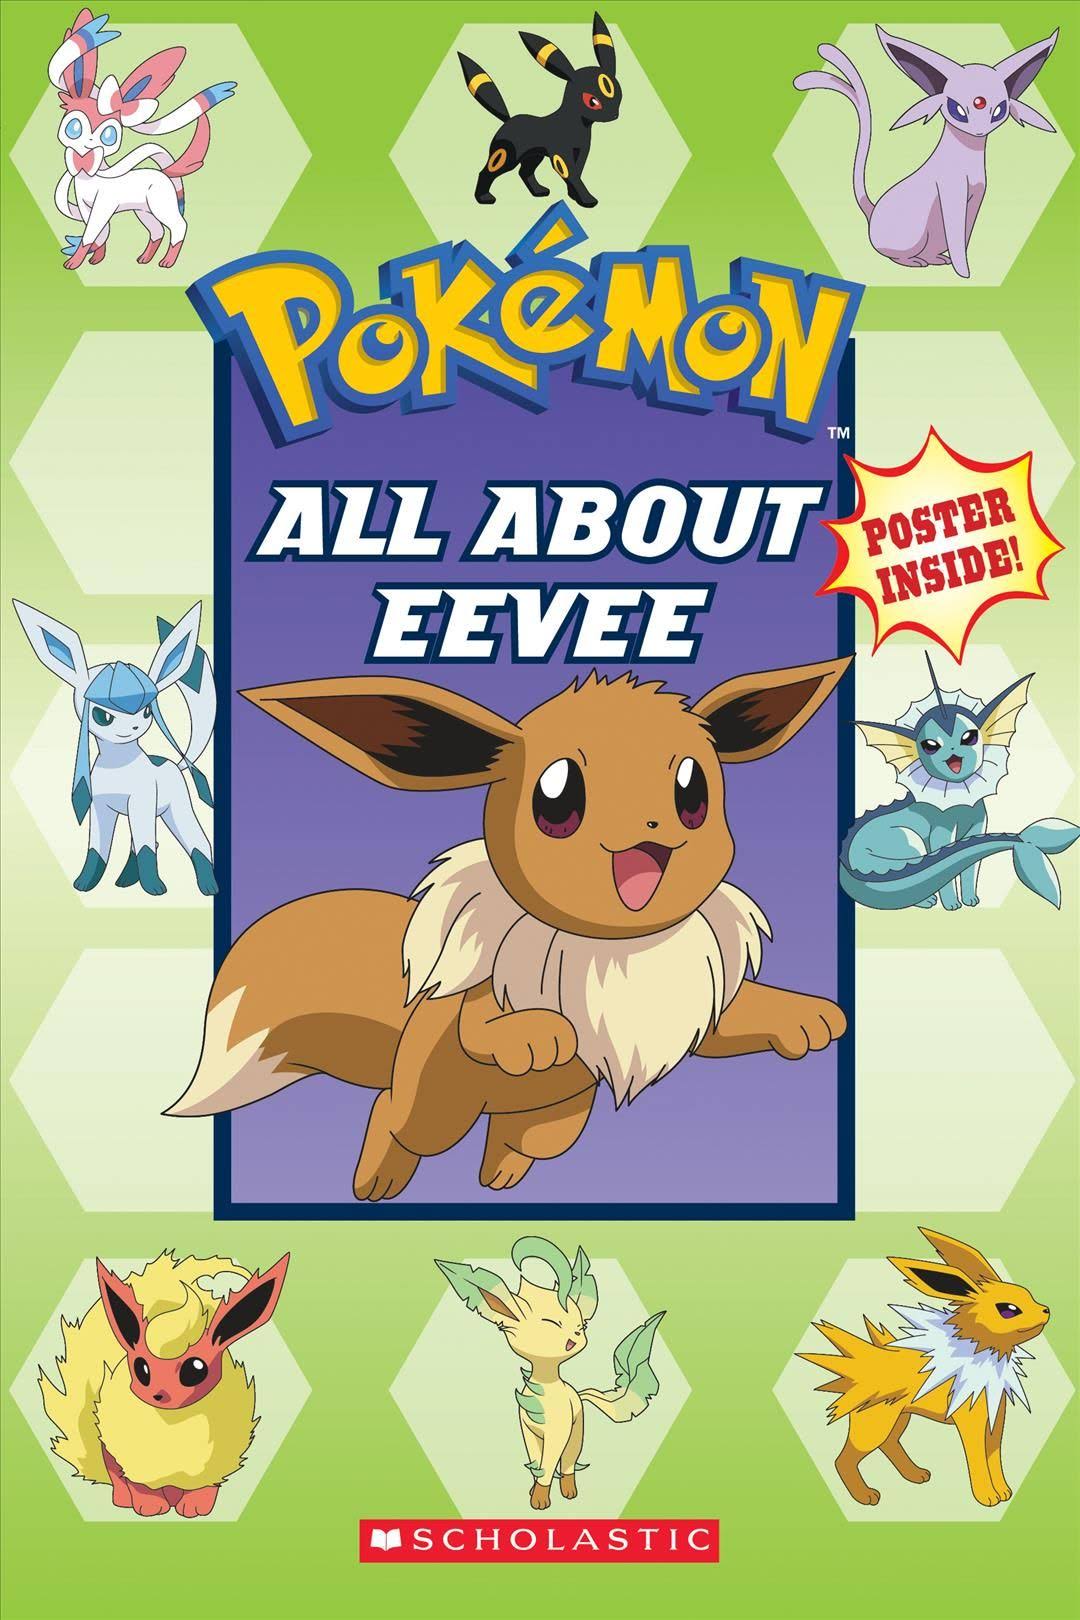 All about Eevee (Pokémon) [Book]